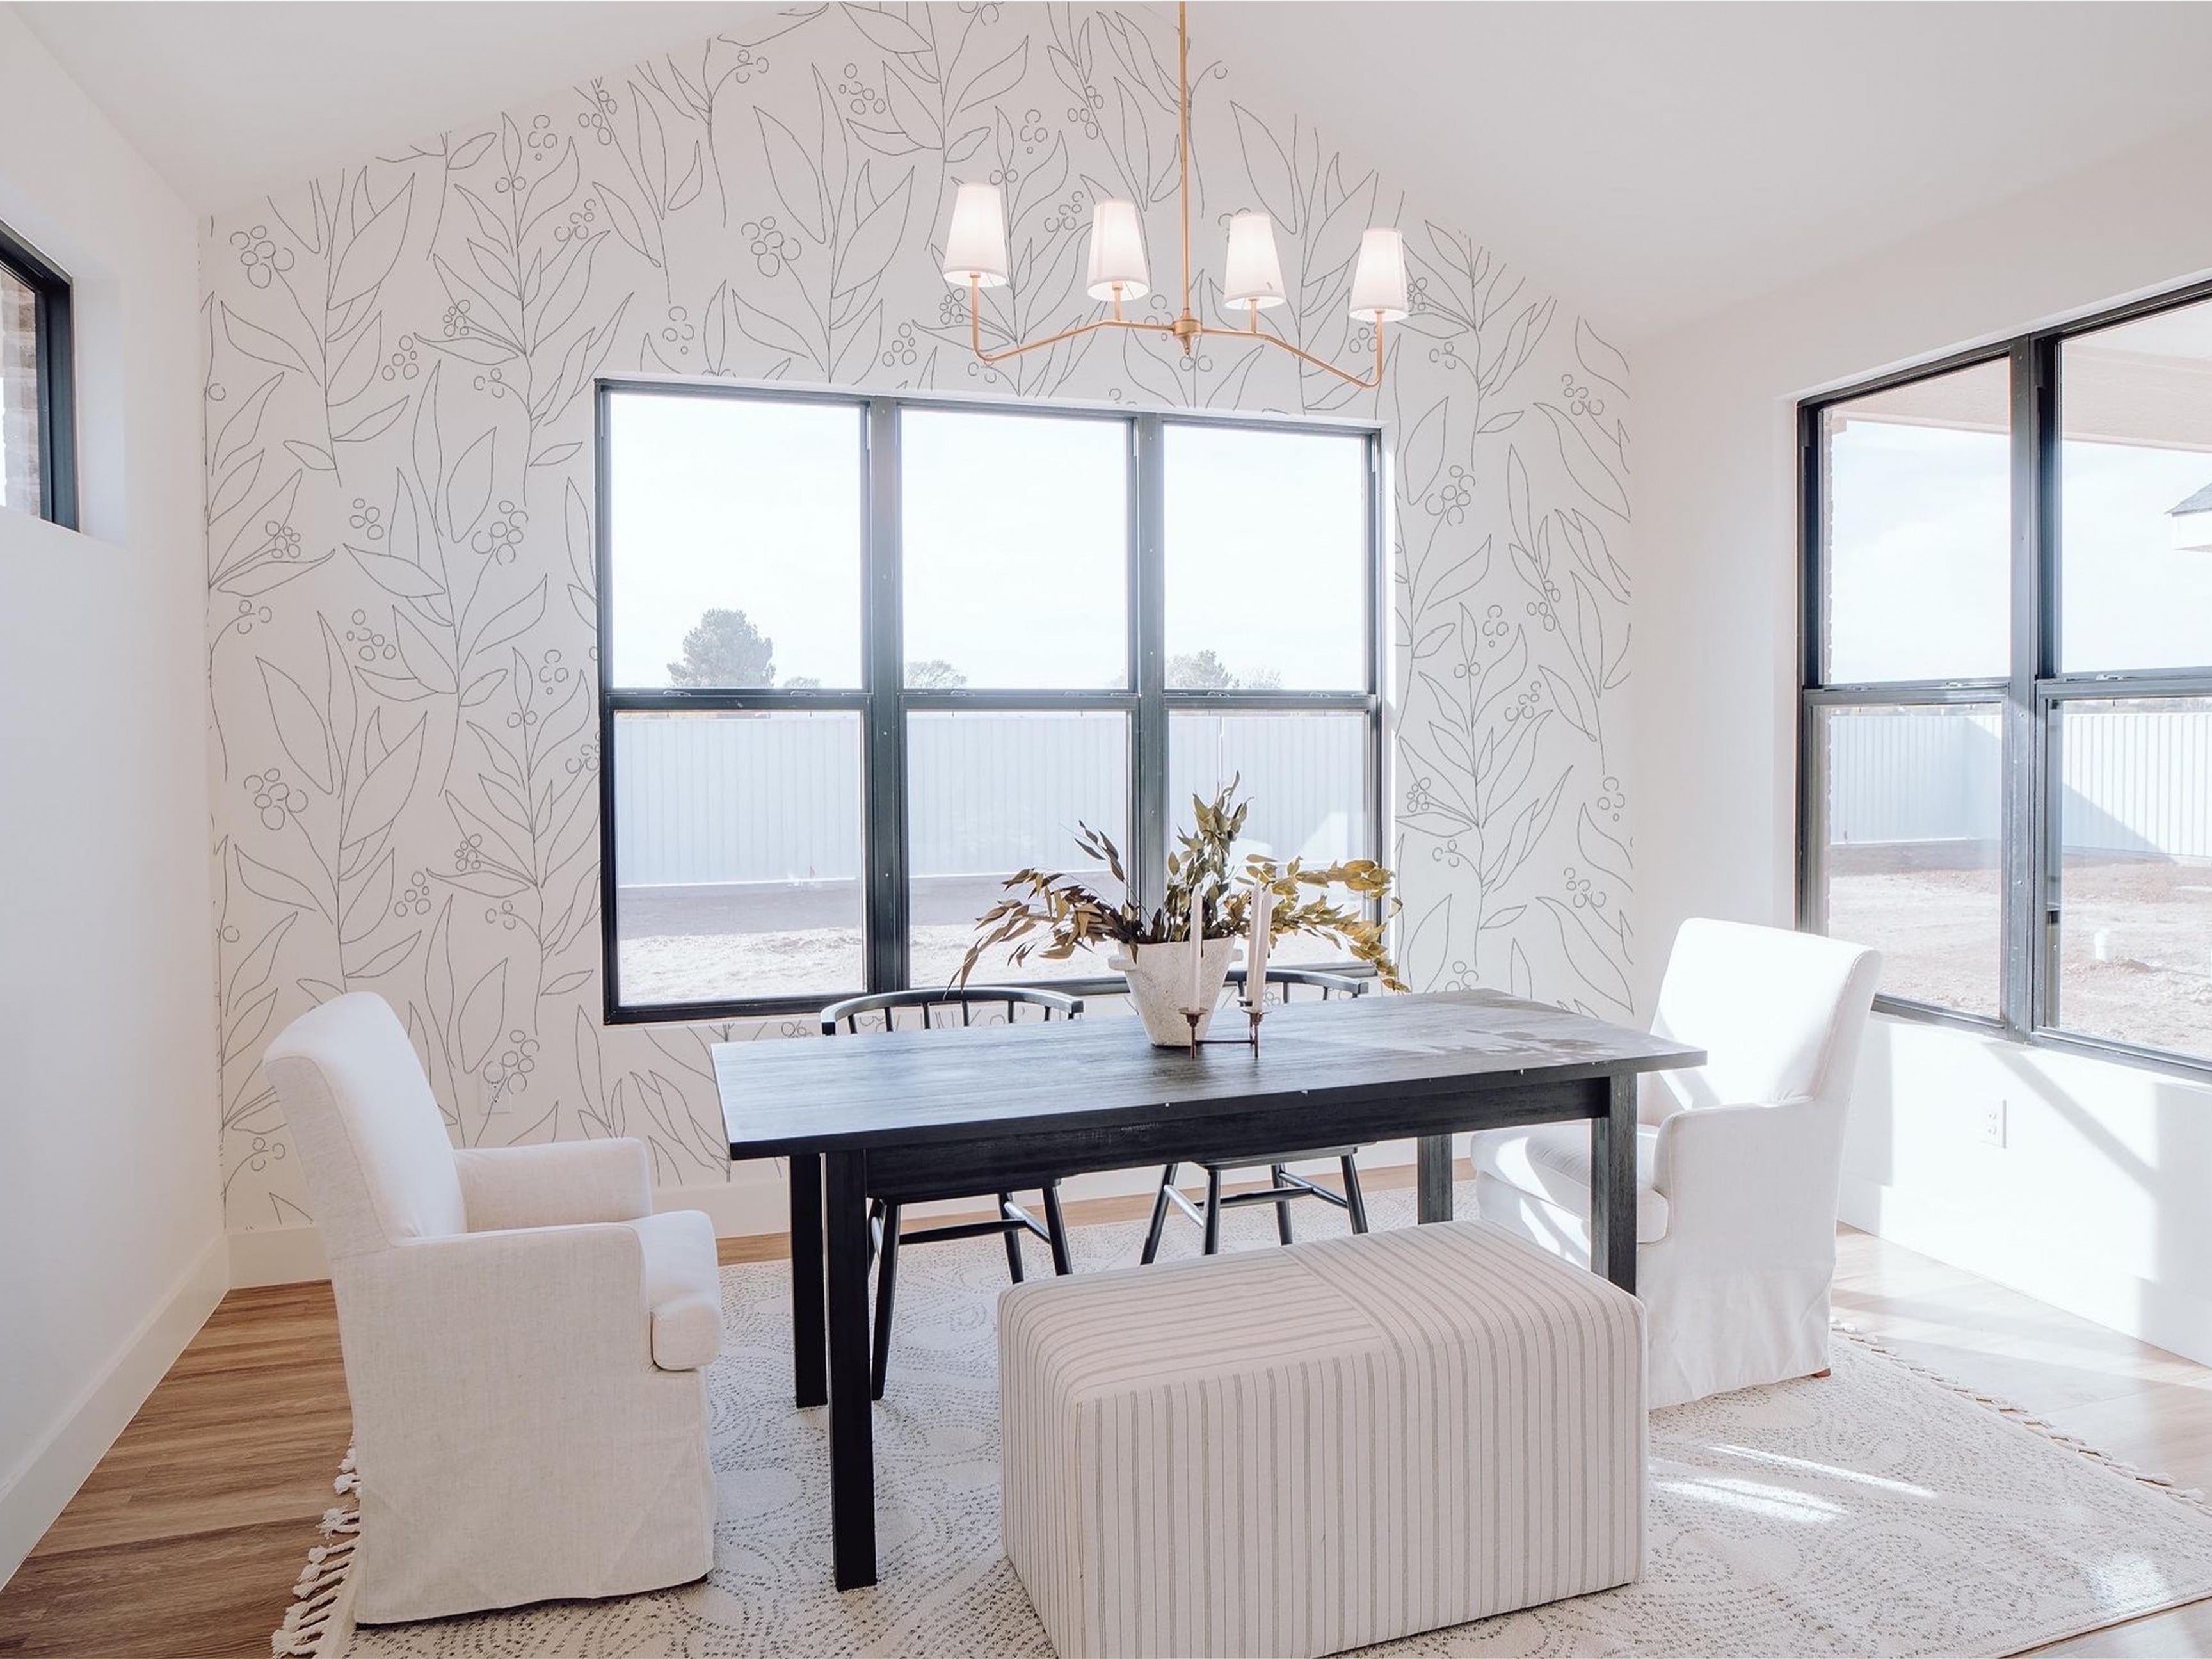 A bright and airy dining room with large windows, a black dining table, white upholstered chairs, and a pendant chandelier. The walls are decorated with white wallpaper showcasing an abstract black floral pattern, enhancing the room's elegance.